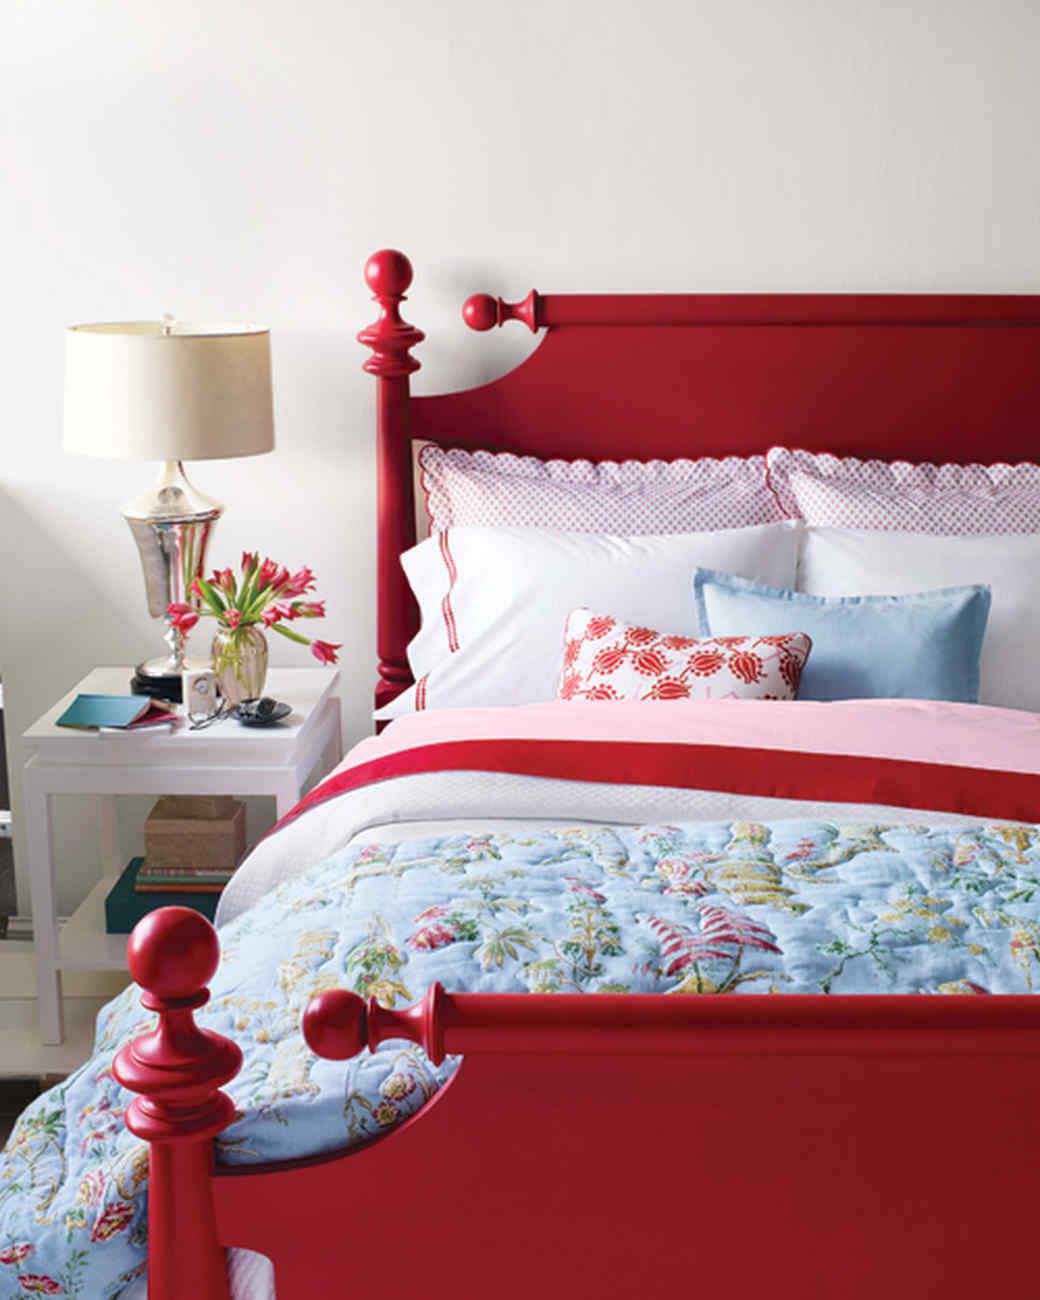 How To Paint A Bed Frame Martha Stewart, Can You Spray Paint Fabric Headboard